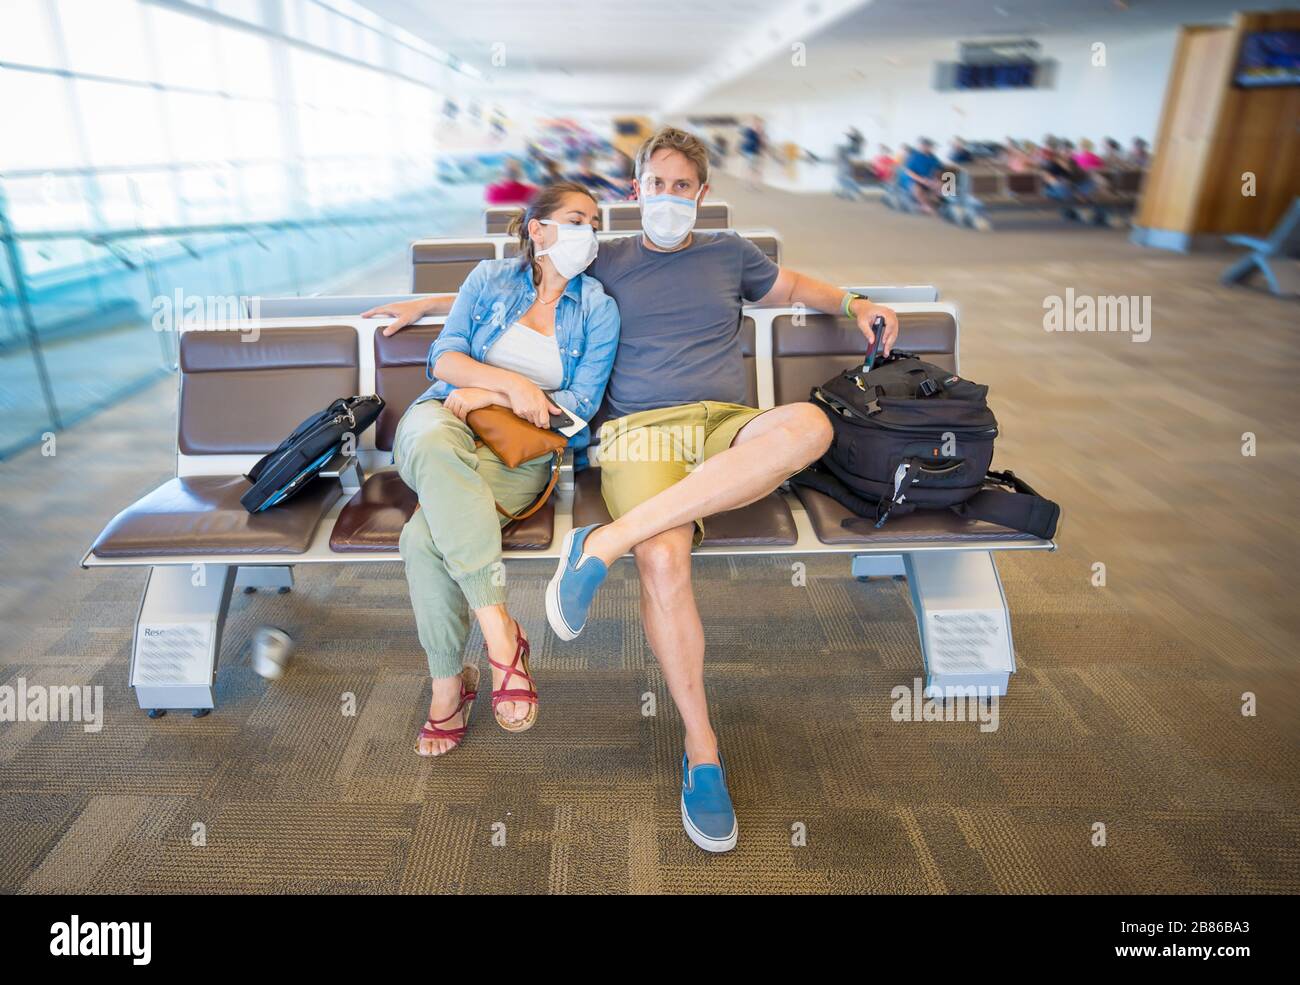 Coronavirus outbreak travel restrictions. Travelers with face mask at international airport affected by flights cancellations and travel ban. COVID-19 Stock Photo